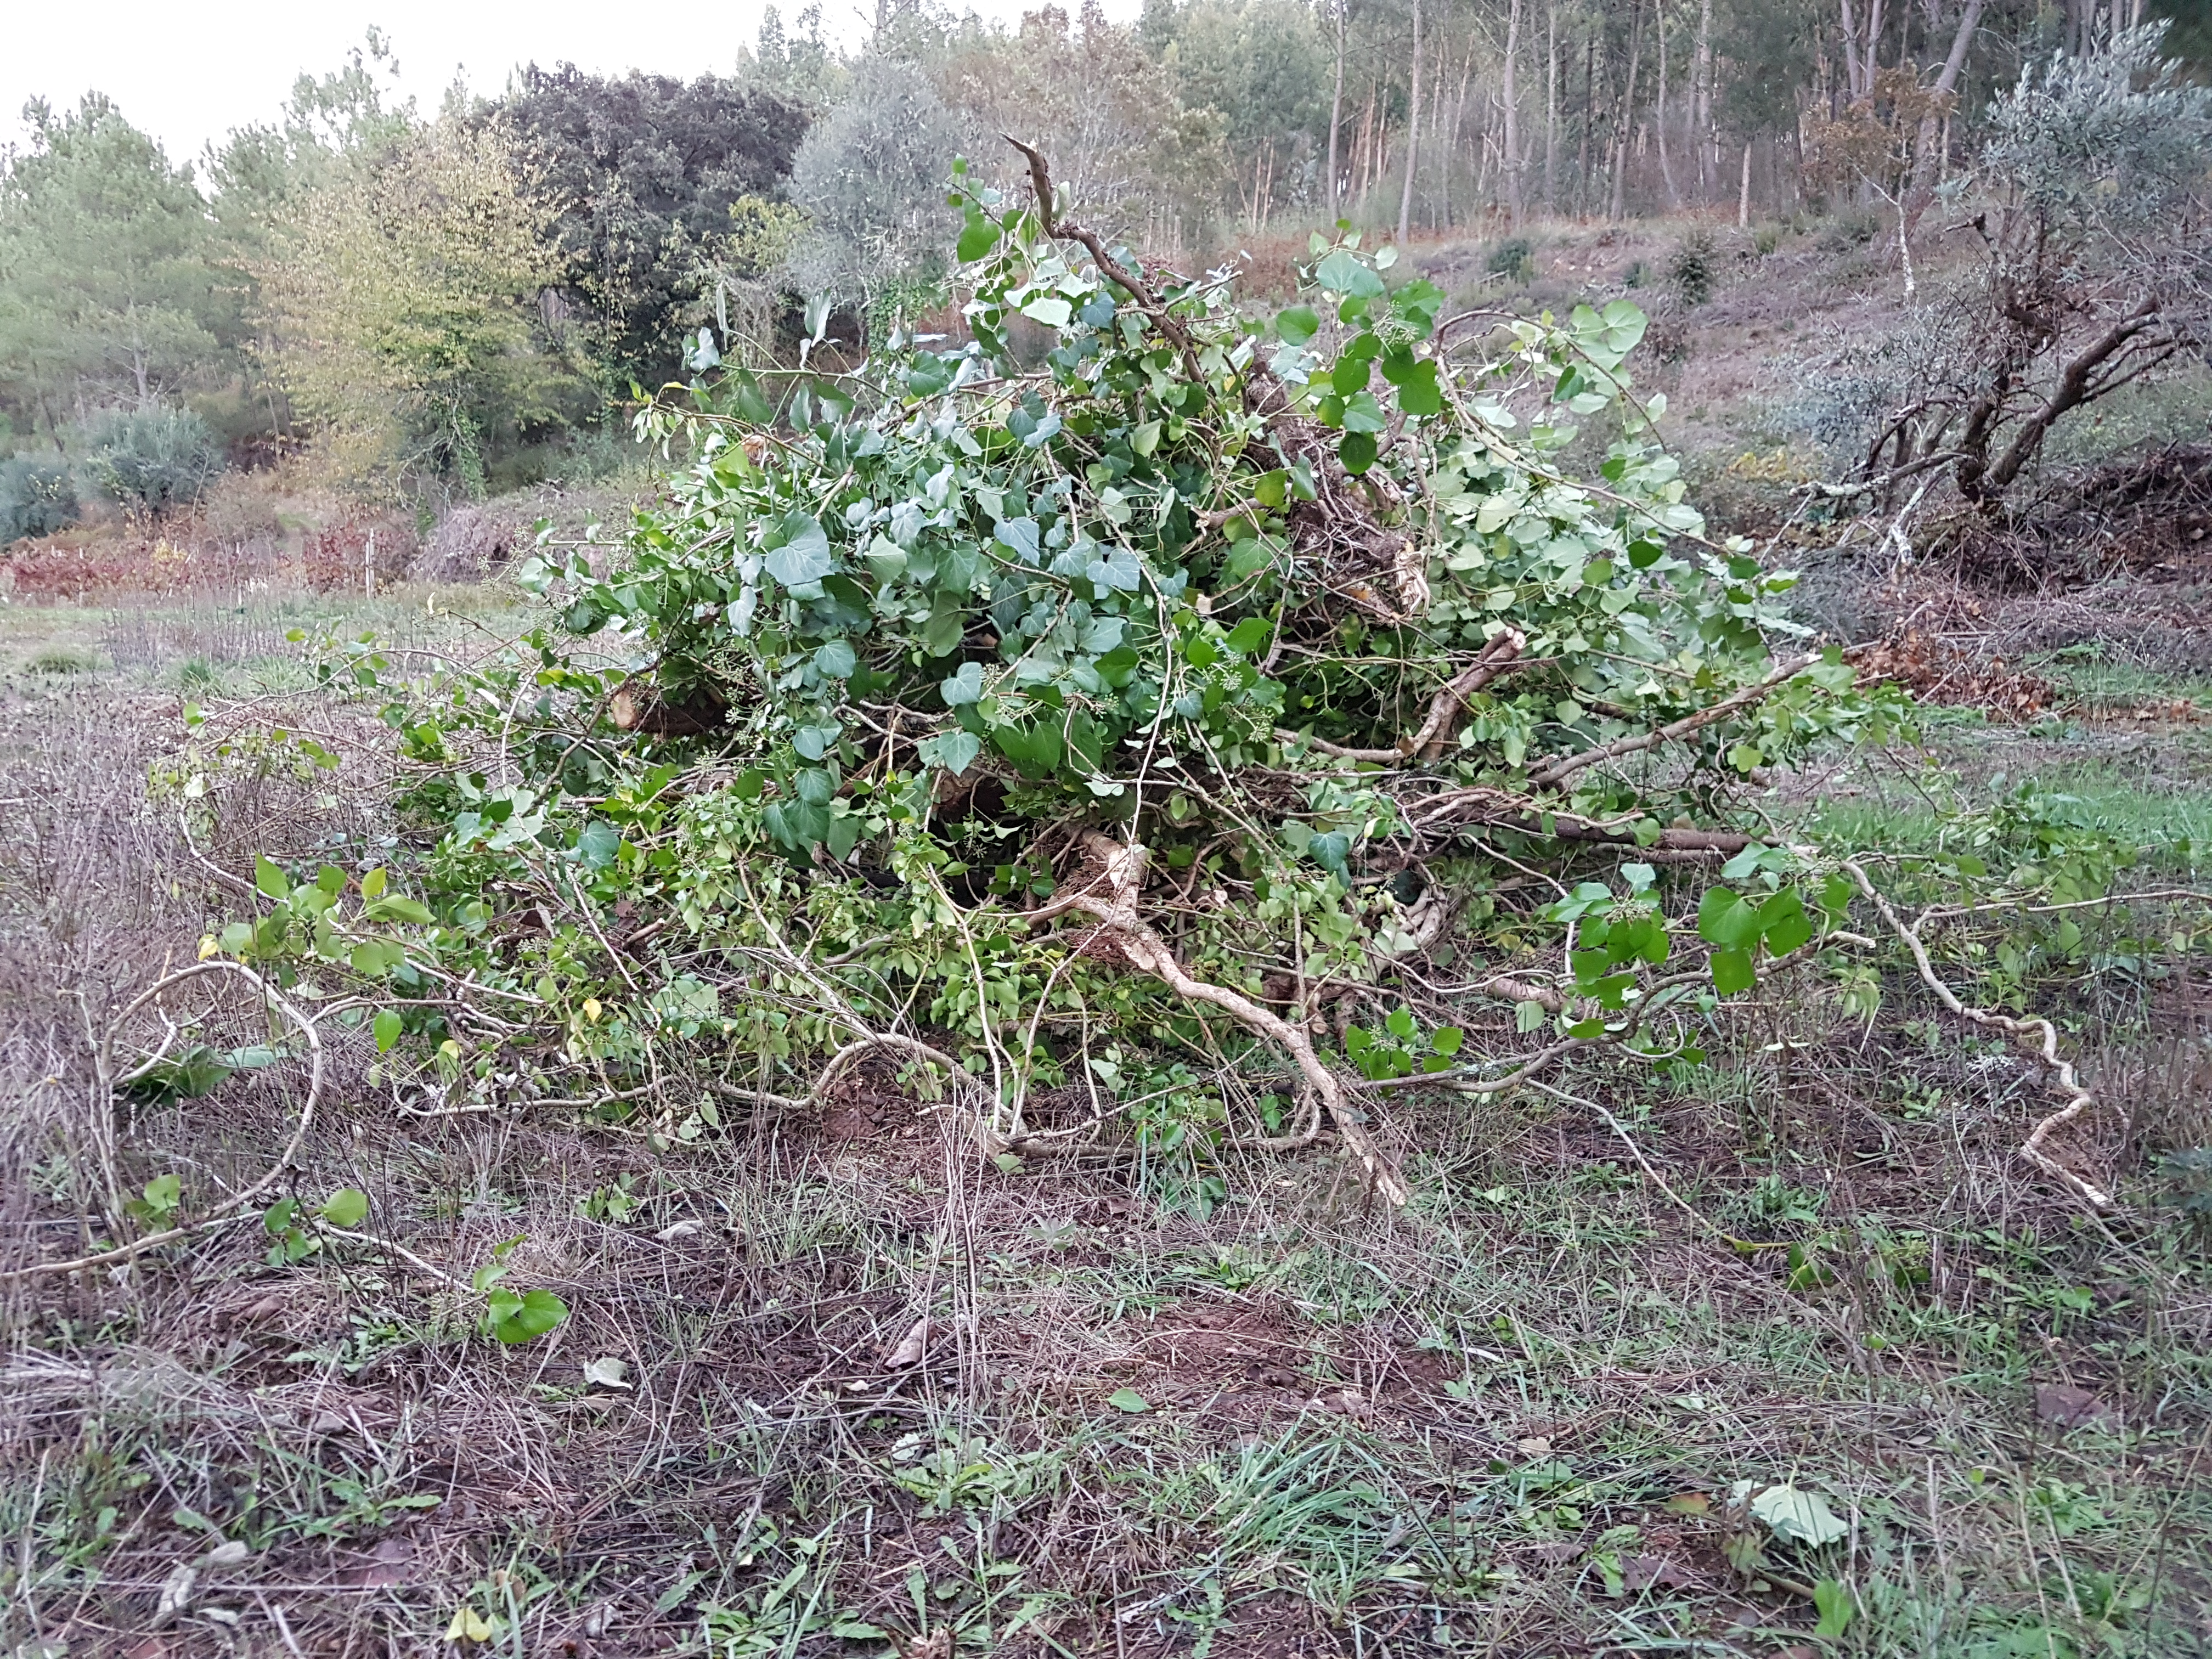 The bramble pile is on the burn list, because the thorny branches don’t make for great mulch if you like to work barefooted or in flip flops (like I do). This separate pile of Hedera helix parts will make for less pointy mulch.